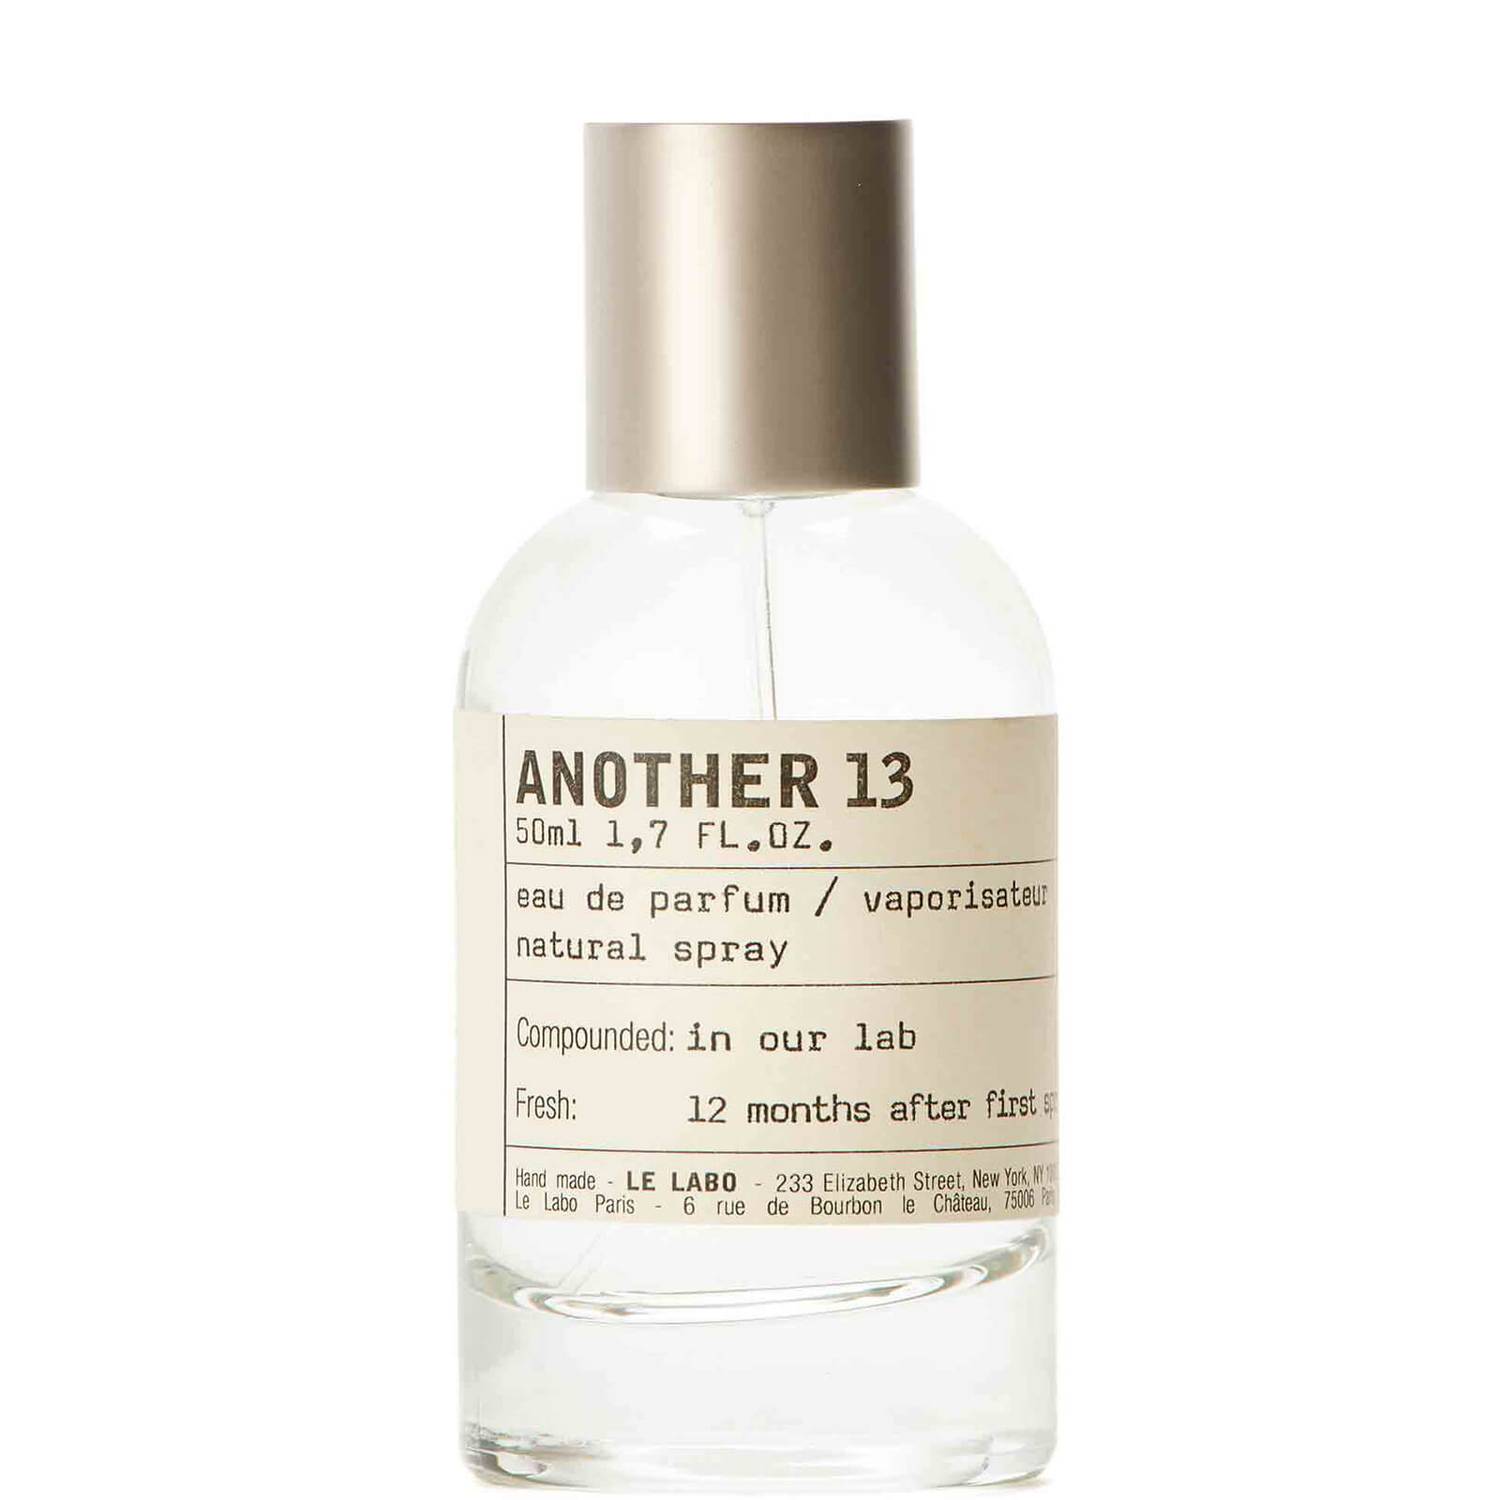 Use this instead of pheromone perfumes…time to be lathered & slathered, body oil